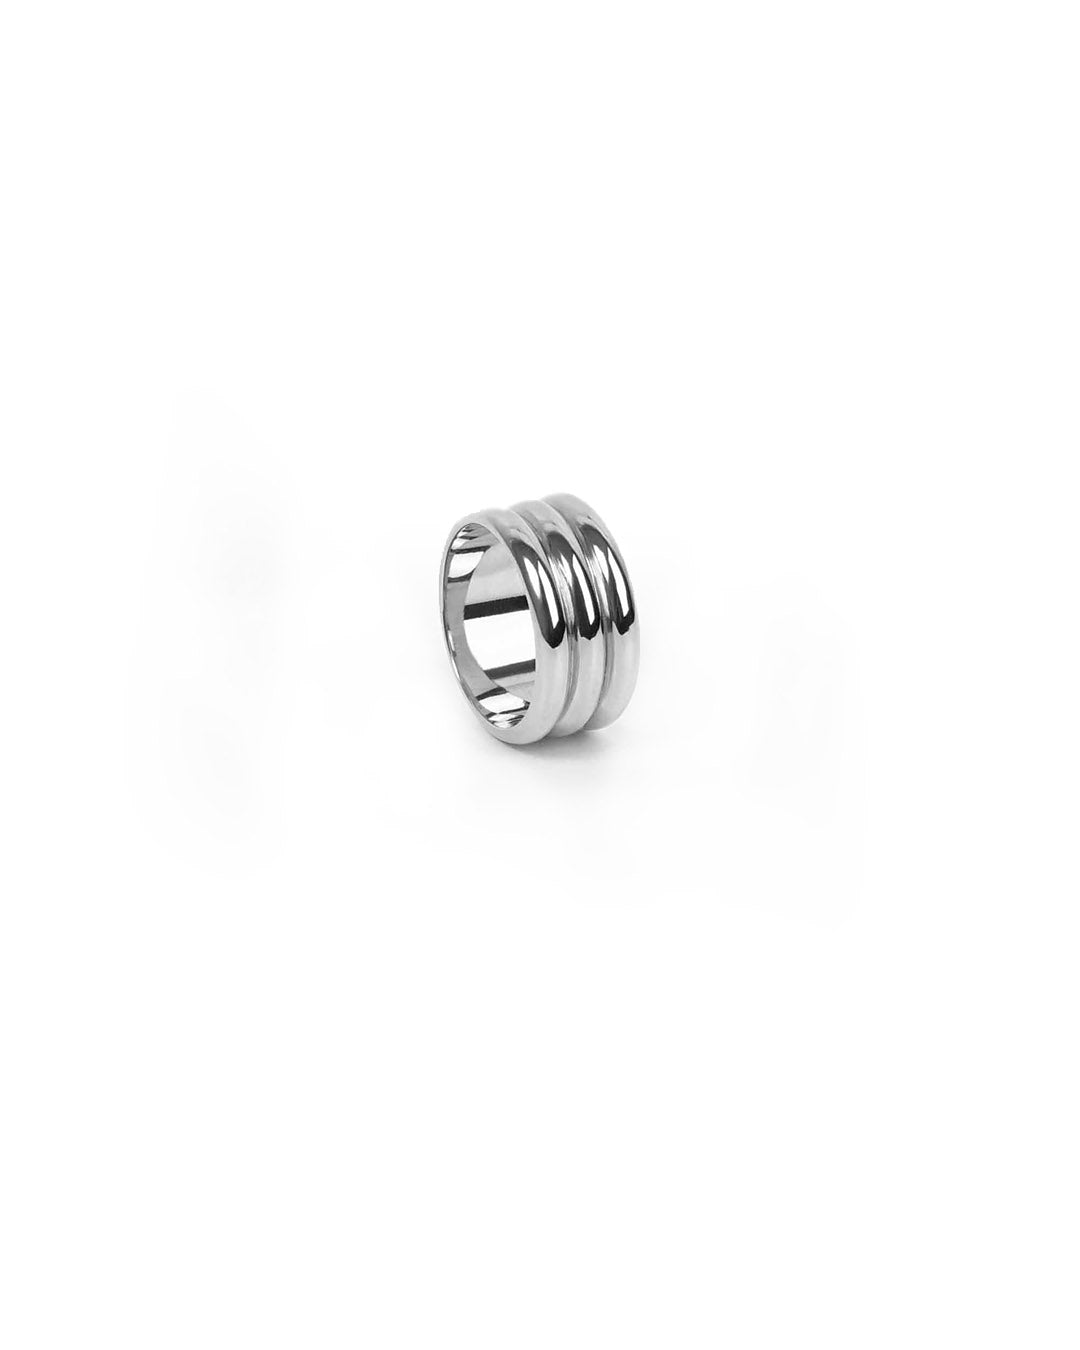 Handmade thick band Ring Form - Silver - NEEO